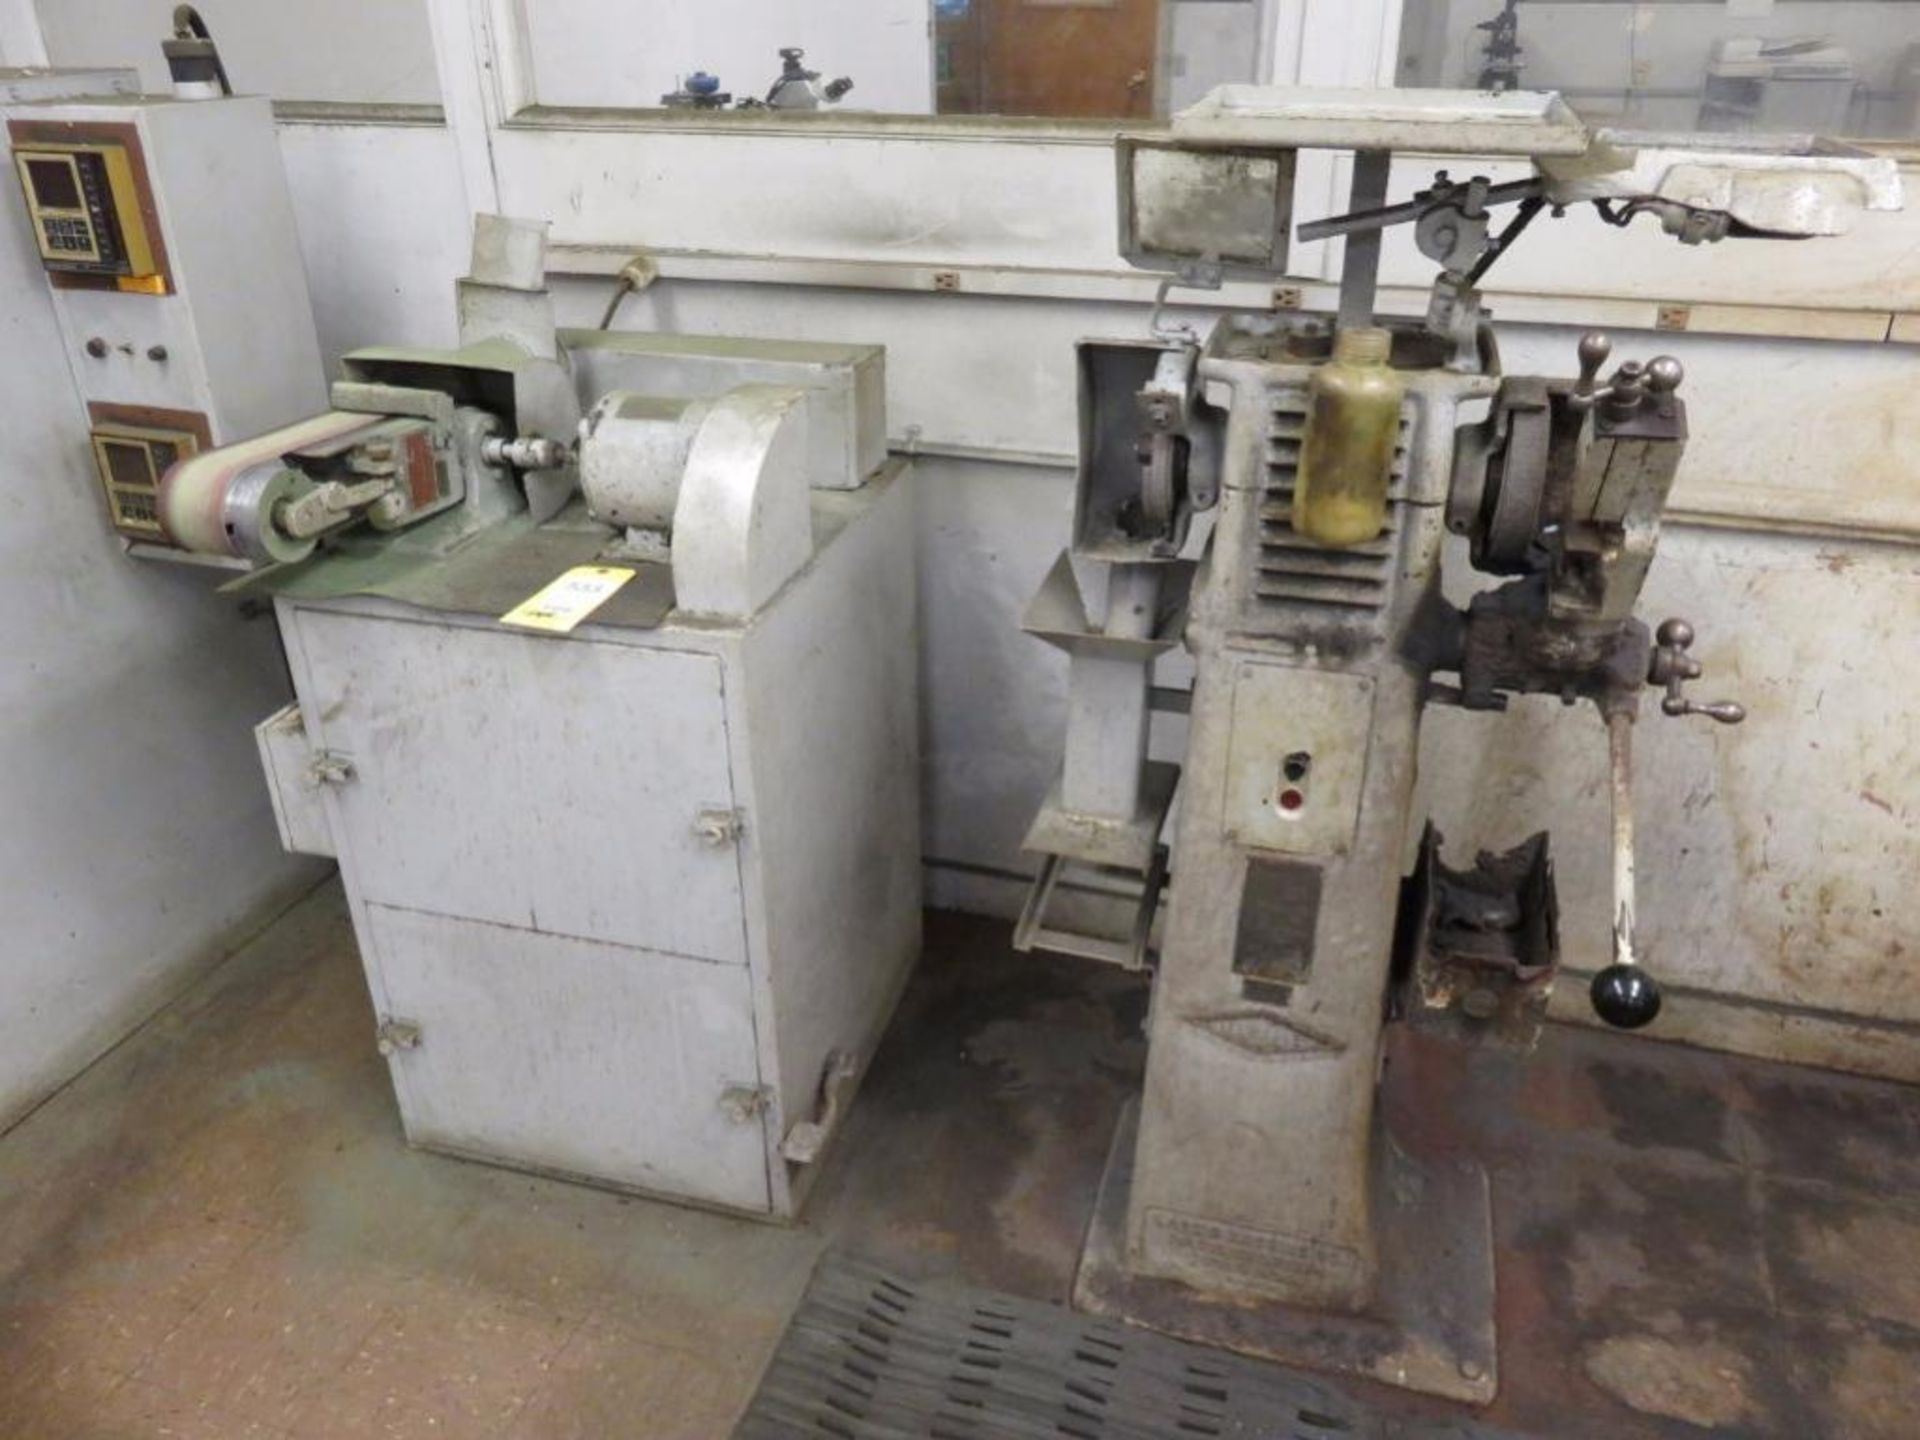 LOT: (1) 6 in. Belt Sander Mounted on Dust Collector, (1) Custom Double End Polishing Stand, (1) Lan